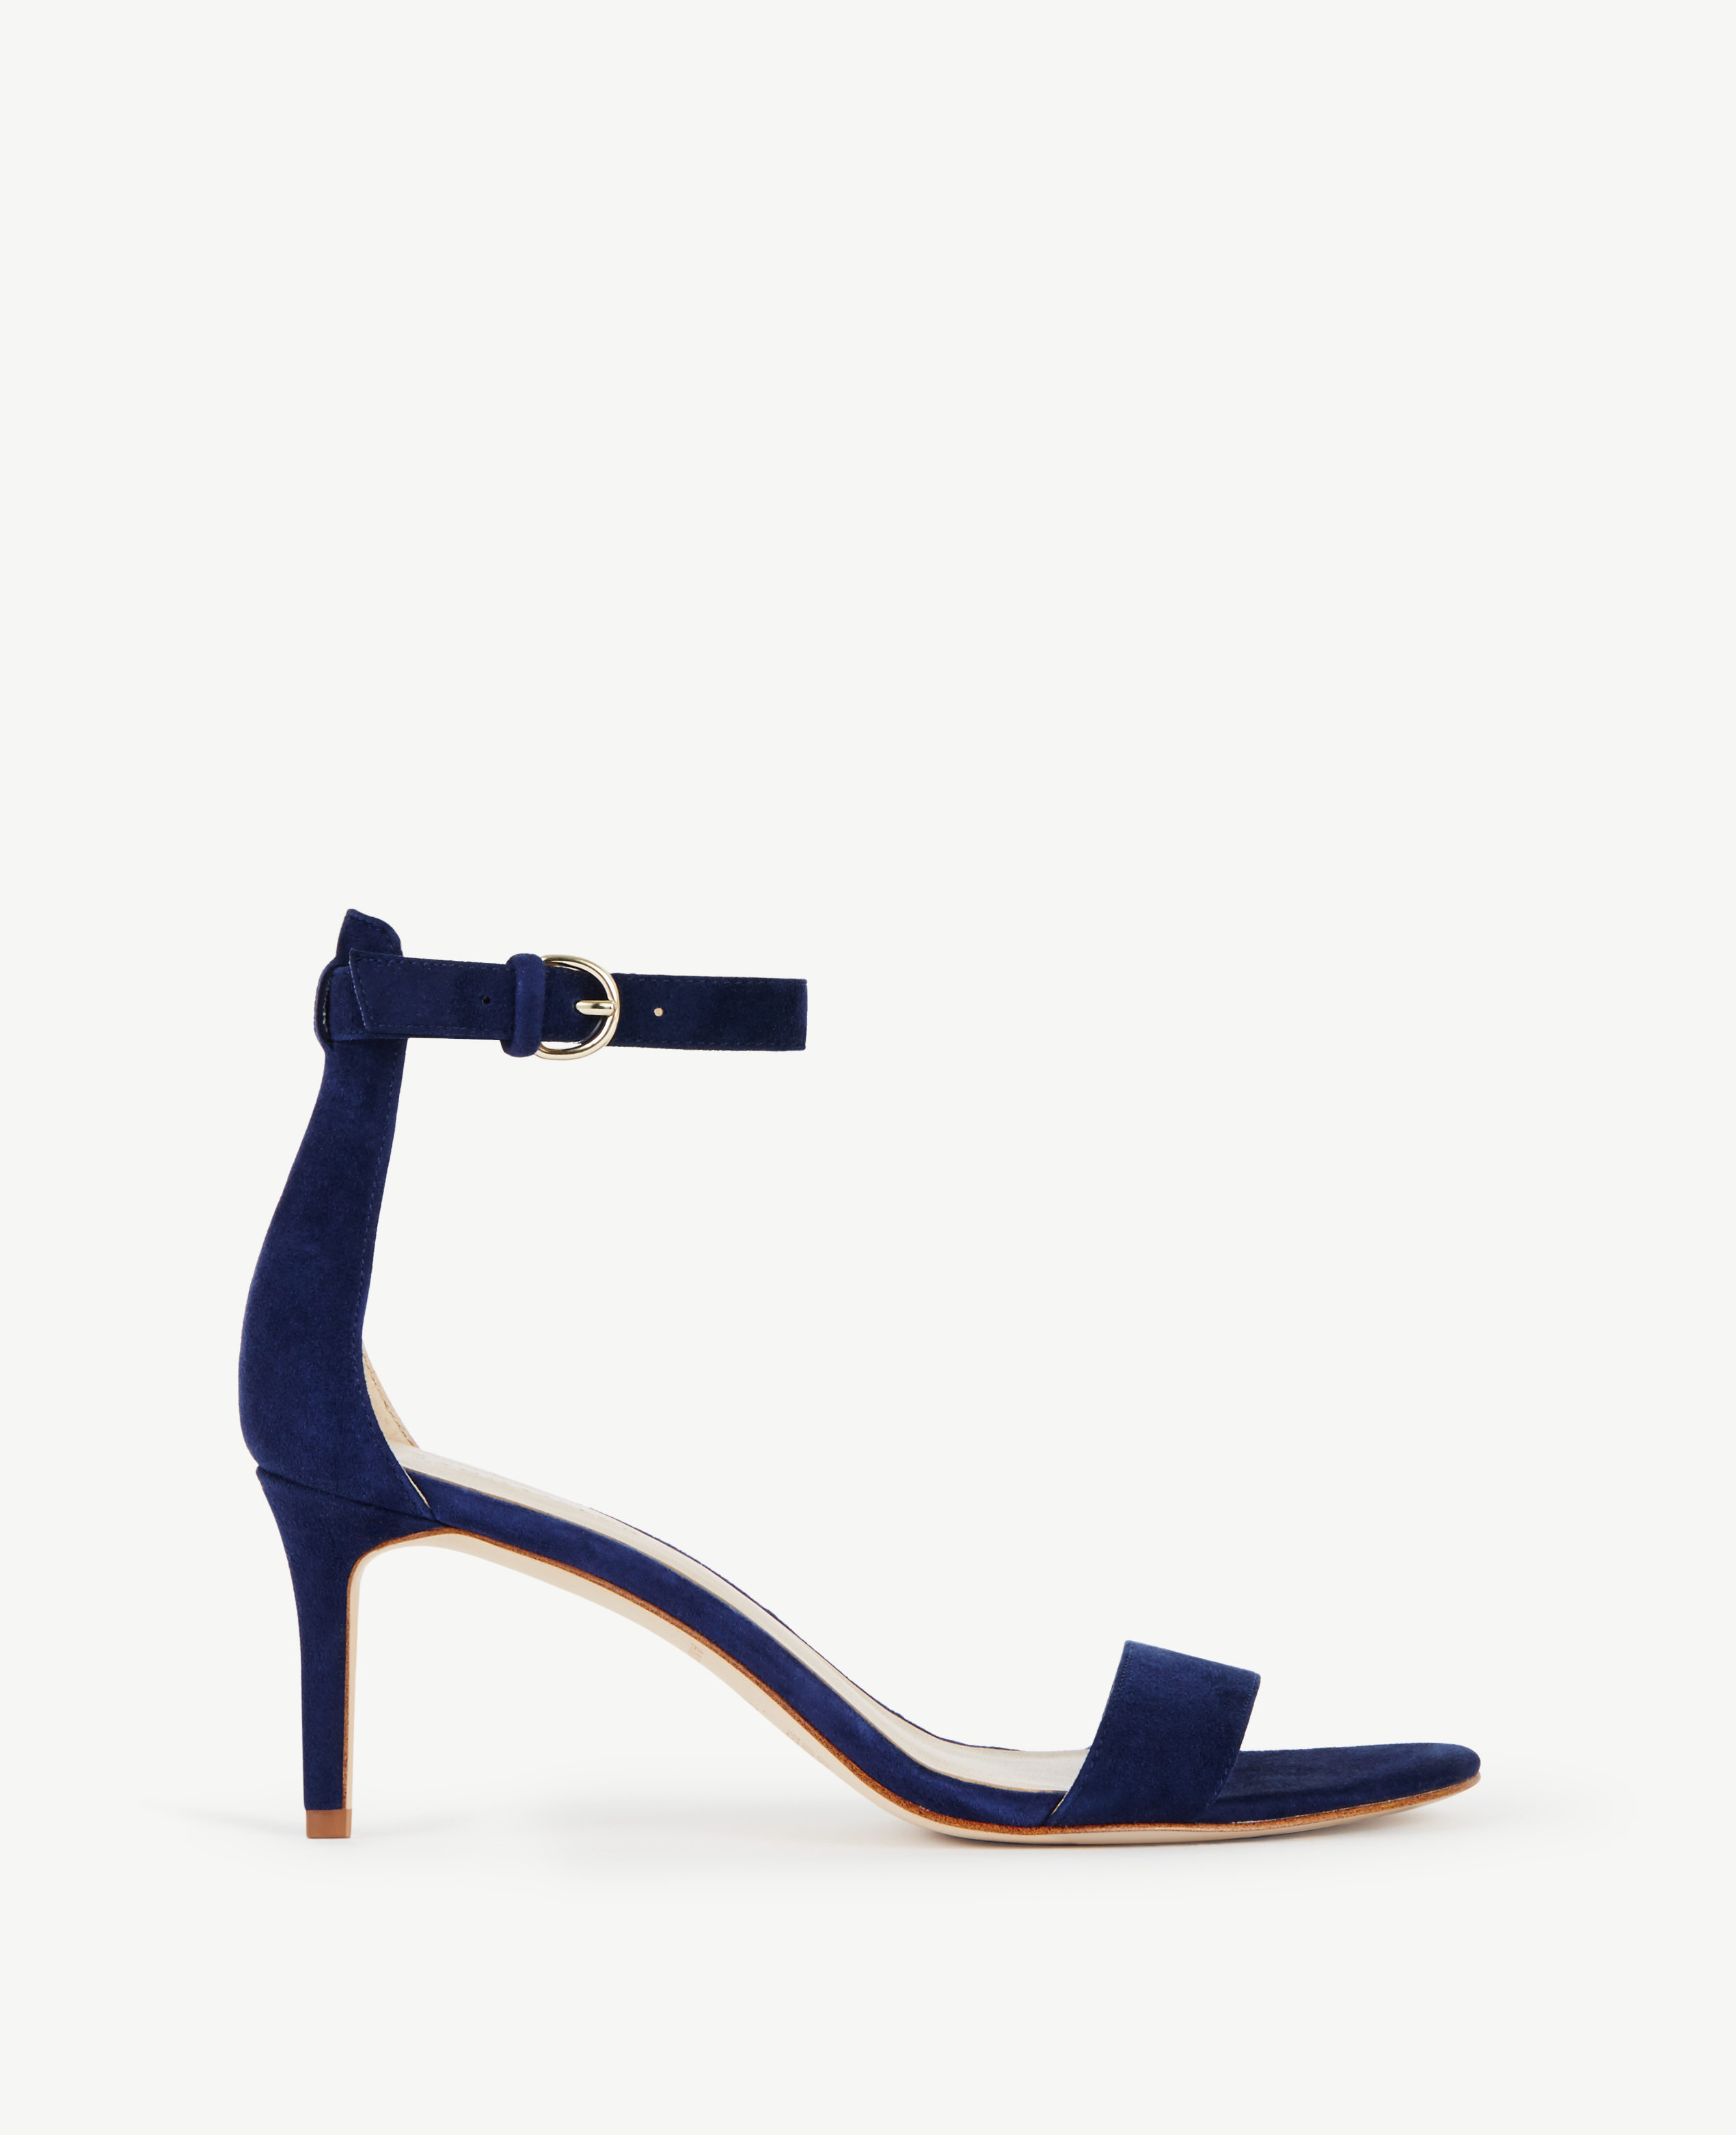 Ann Taylor Kaelyn Suede Strappy Sandals 